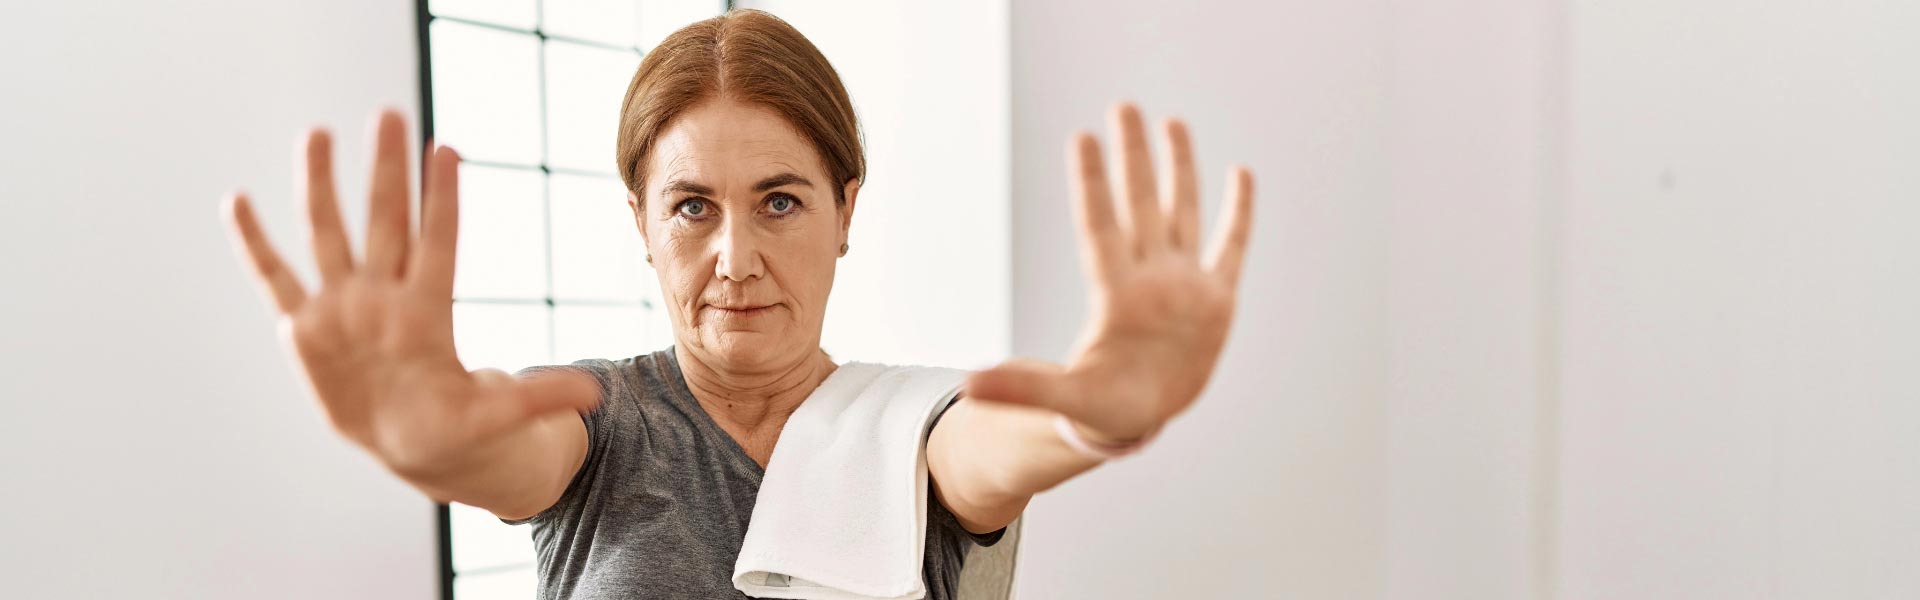 A middle aged woman holding her arms up as to stop dressed in training outfit at a gym